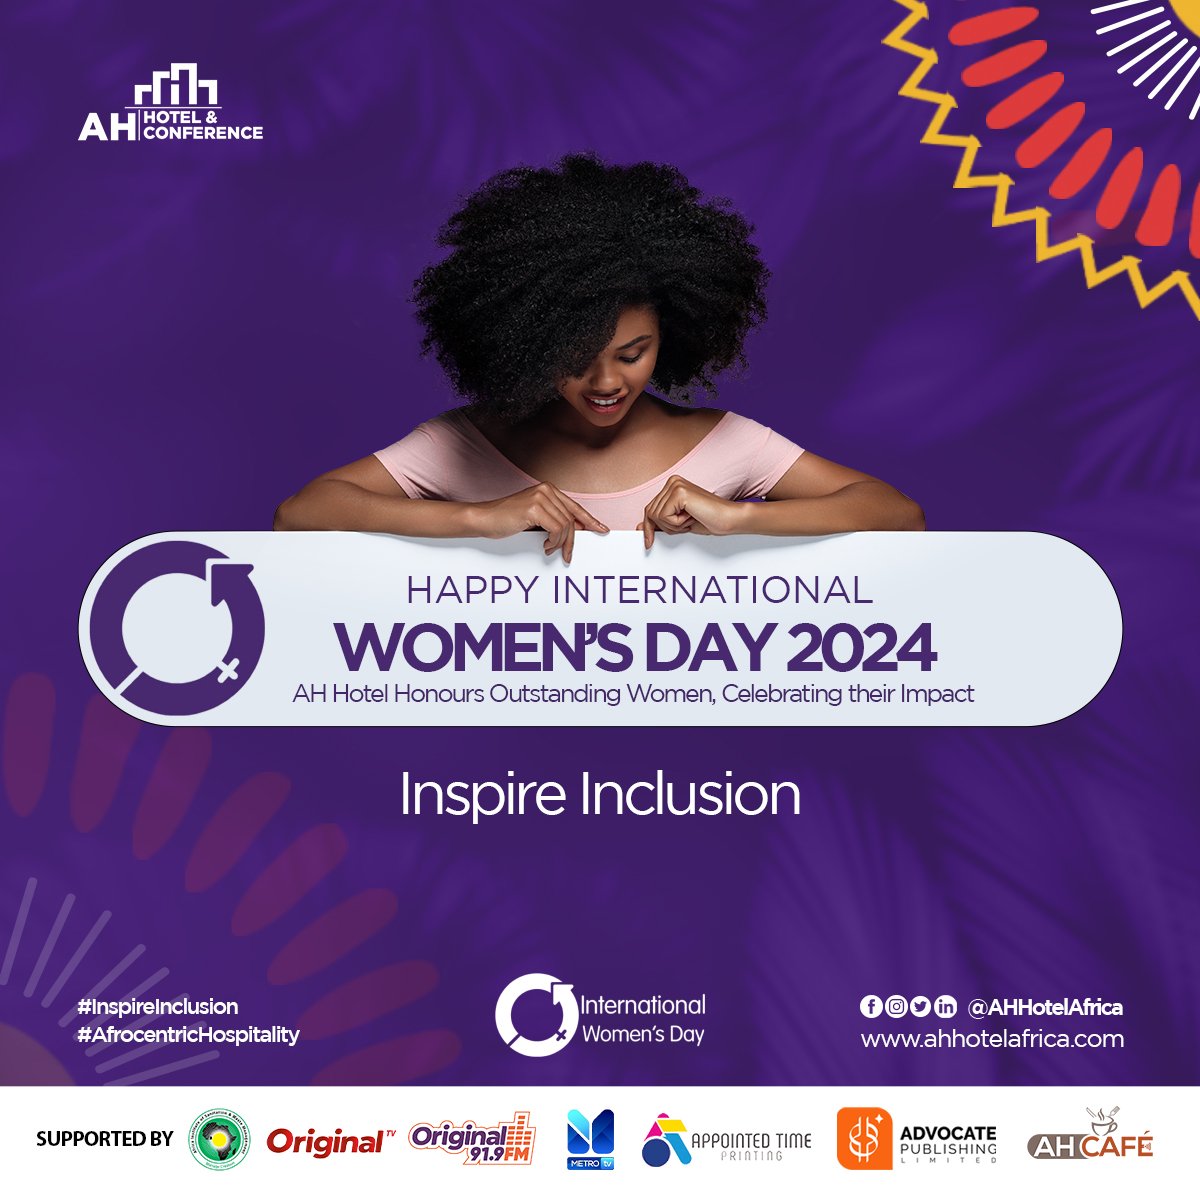 Happy International Women's Day! AH Hotel proudly celebrates the remarkable achievements of women and honors their profound impacts on society. Let's continue to inspire inclusion and empower women everywhere. #InternationalWomensDay #AHHotel #IWD2024 #InspireInclusion